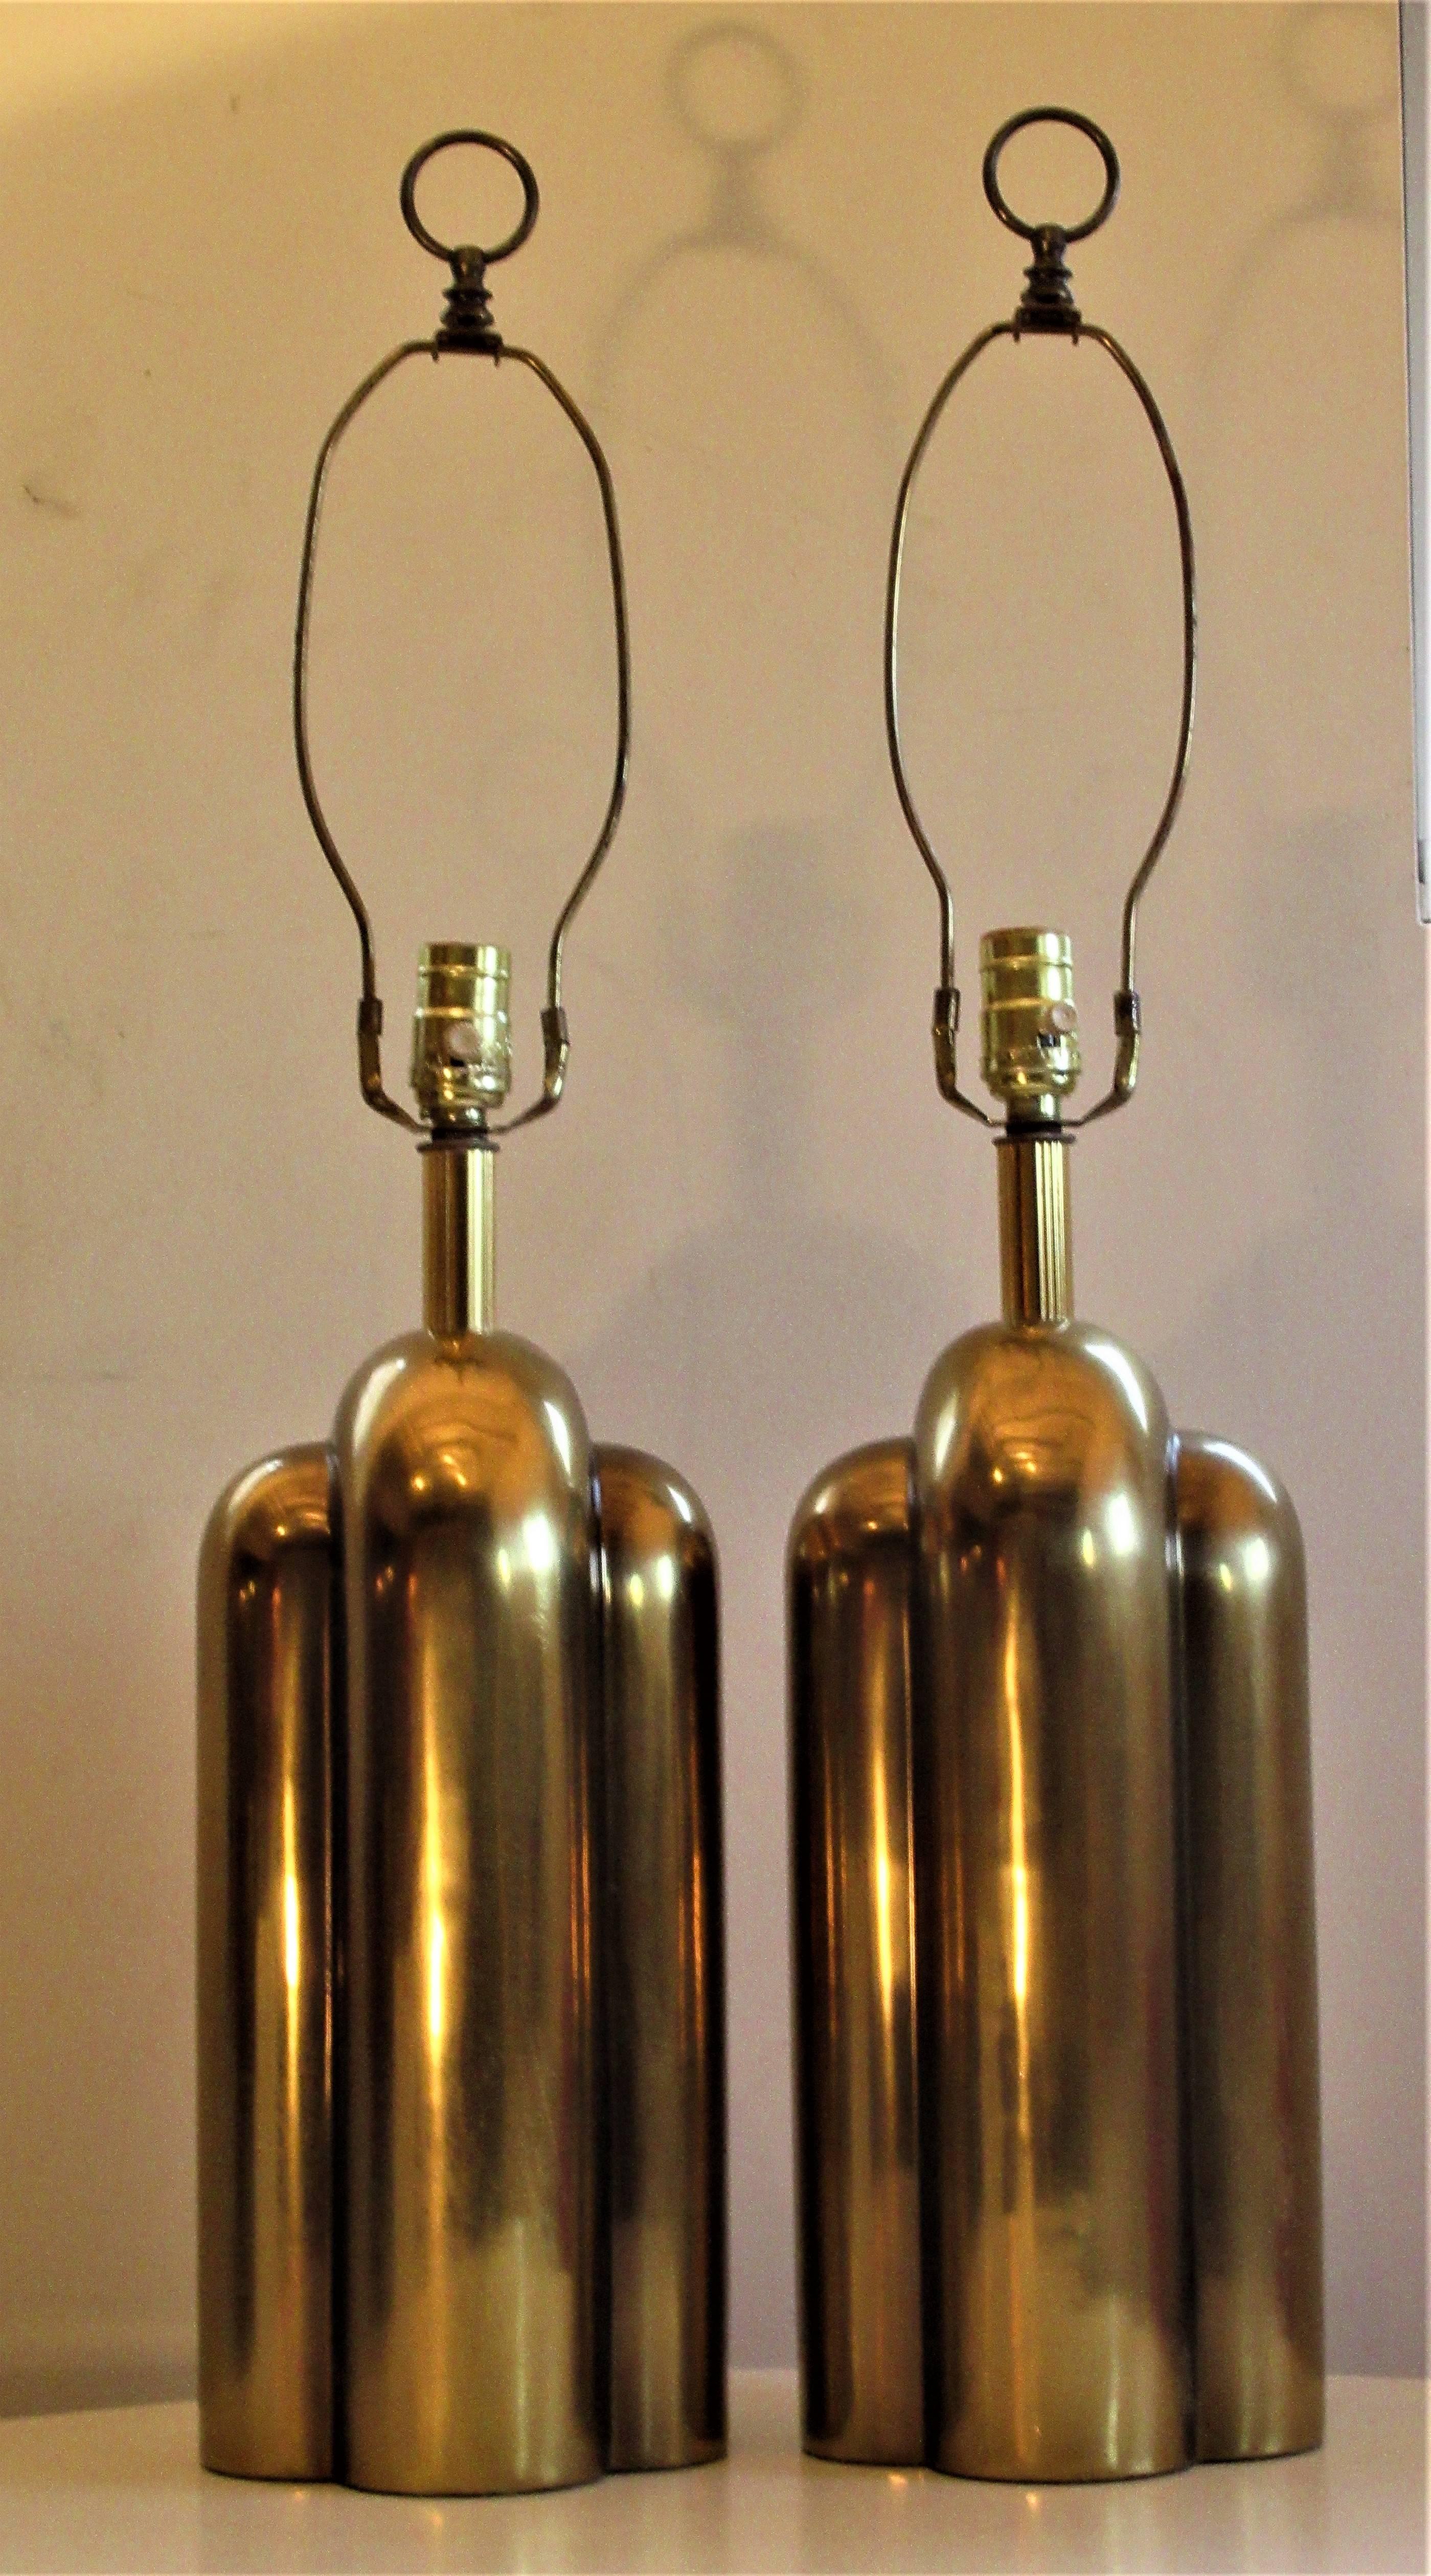 A great looking pair of sculptural bullet shaped modernist brass lamps in the Art Deco style by Westwood industries, circa 1970.